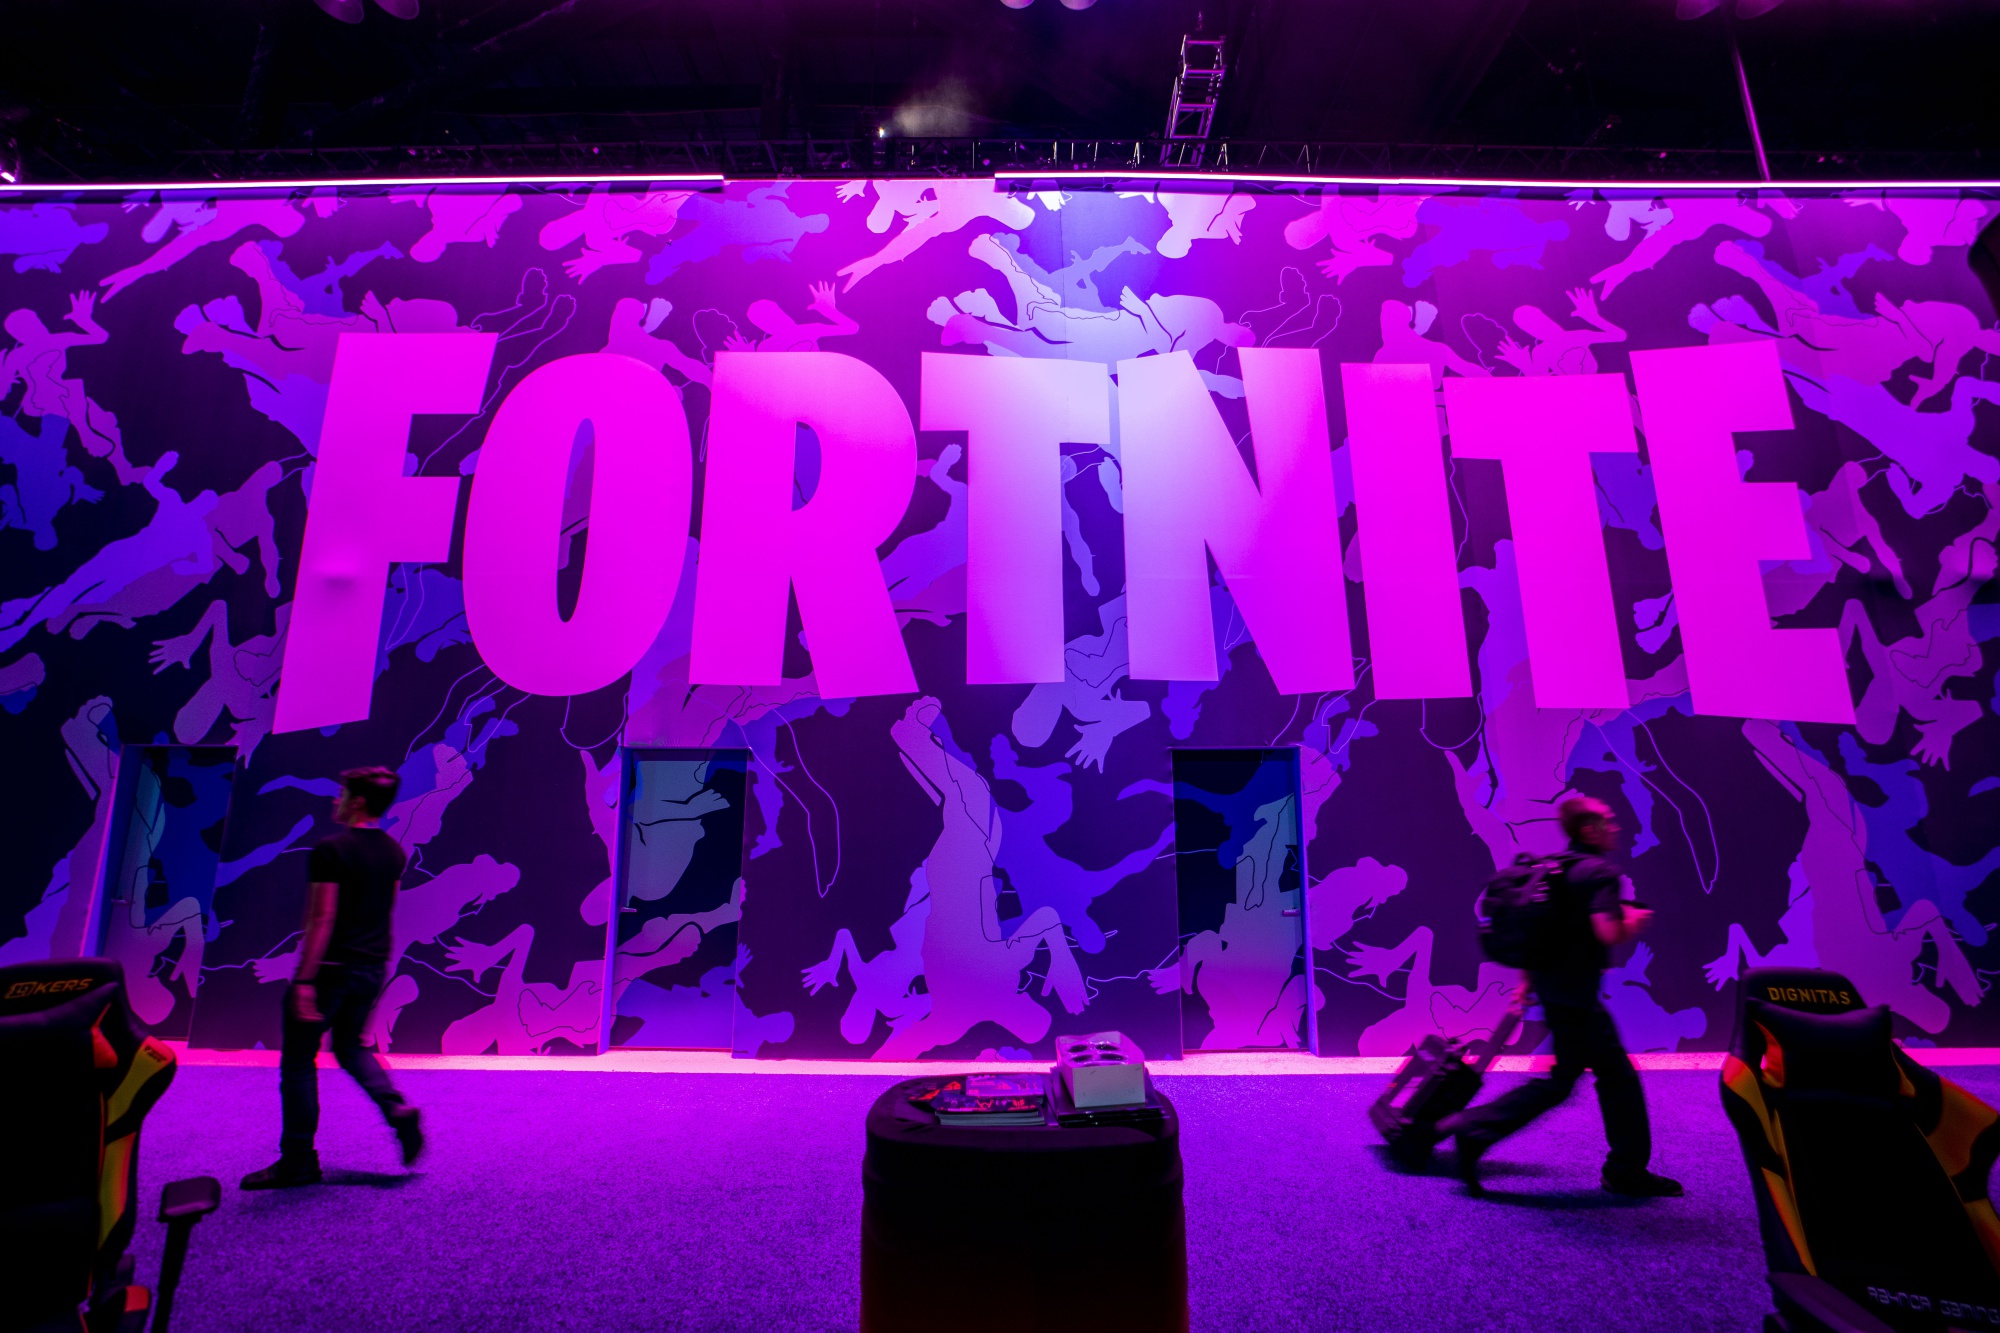 Epic Games to pay over $500m in Fortnite refunds & privacy